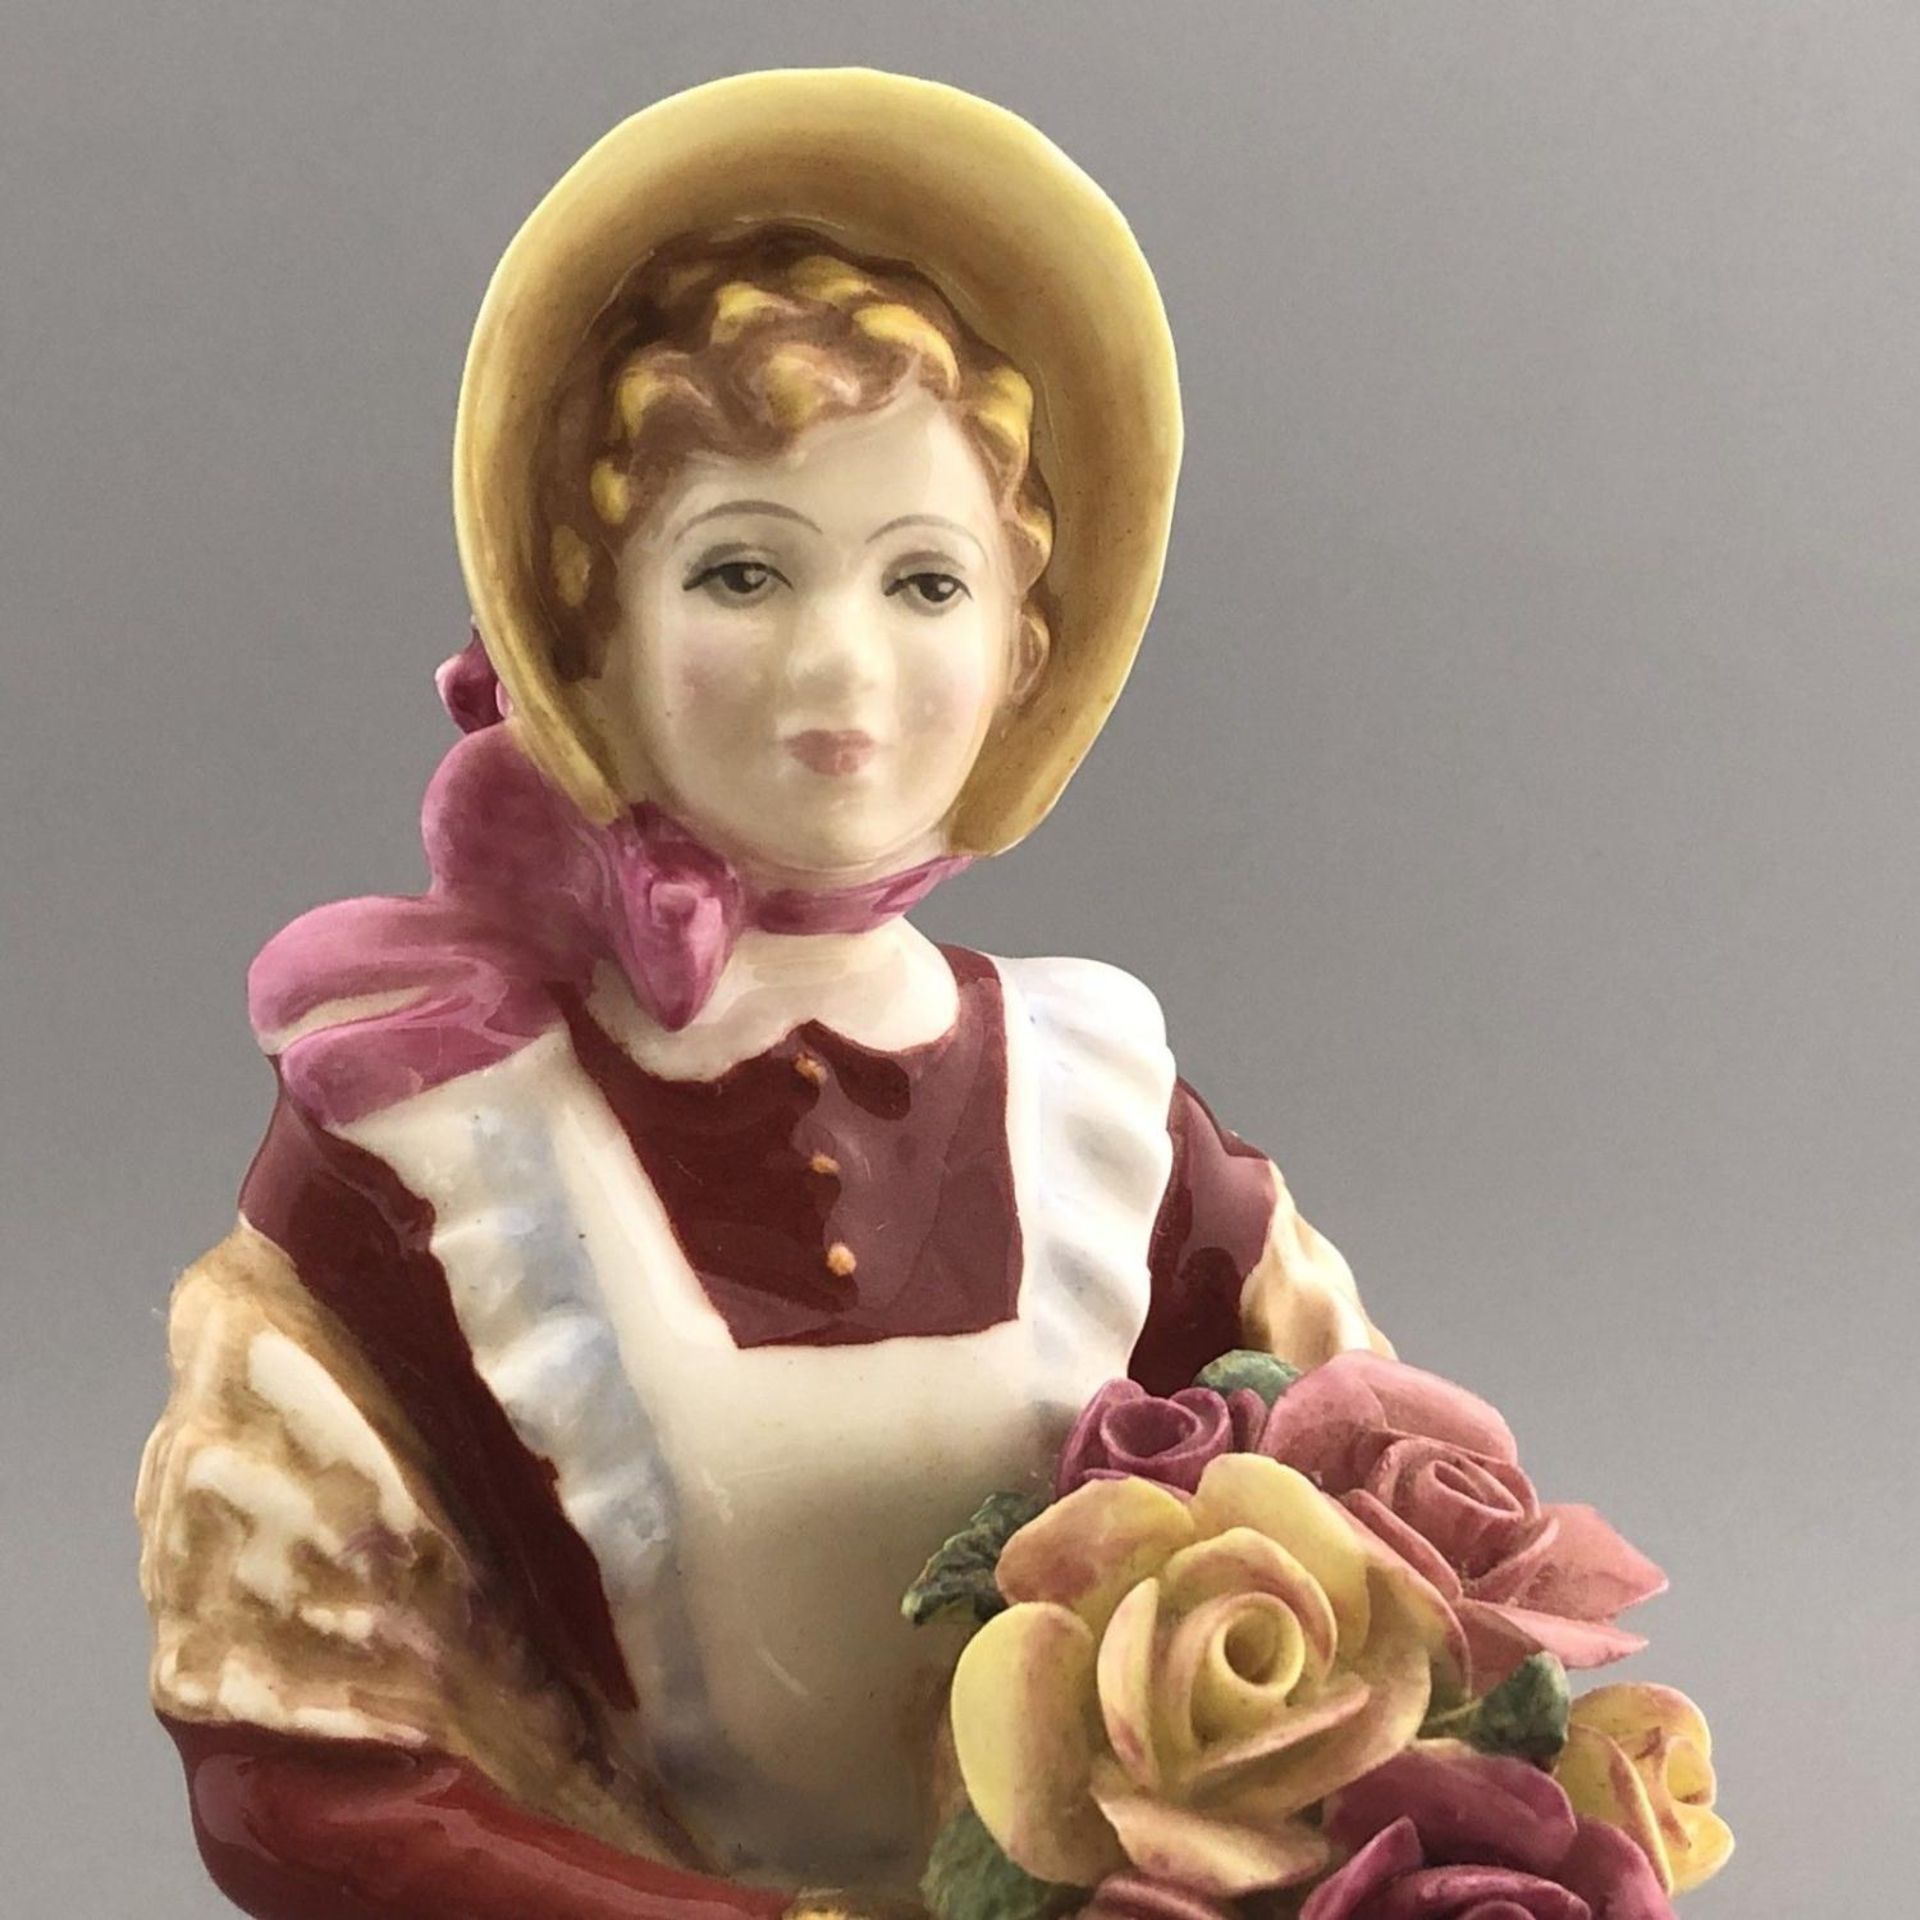 English Porcelain Figurine "Old Country Roses" - Royal Doulton HN 3692 - Image 7 of 7